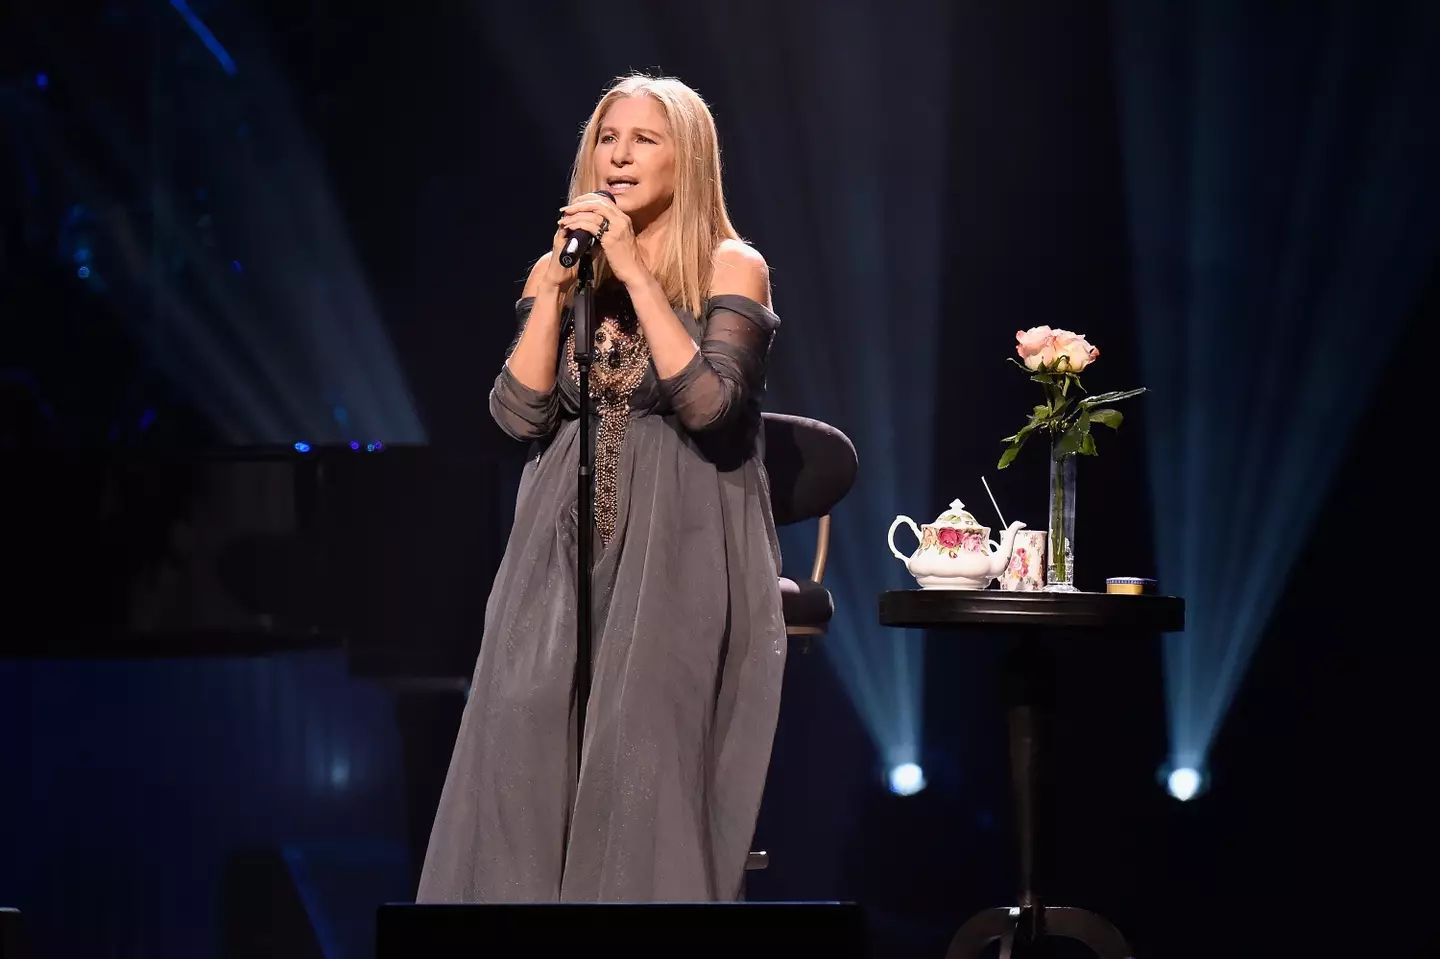 Barba Streisand caused mixed responses with her outfits.